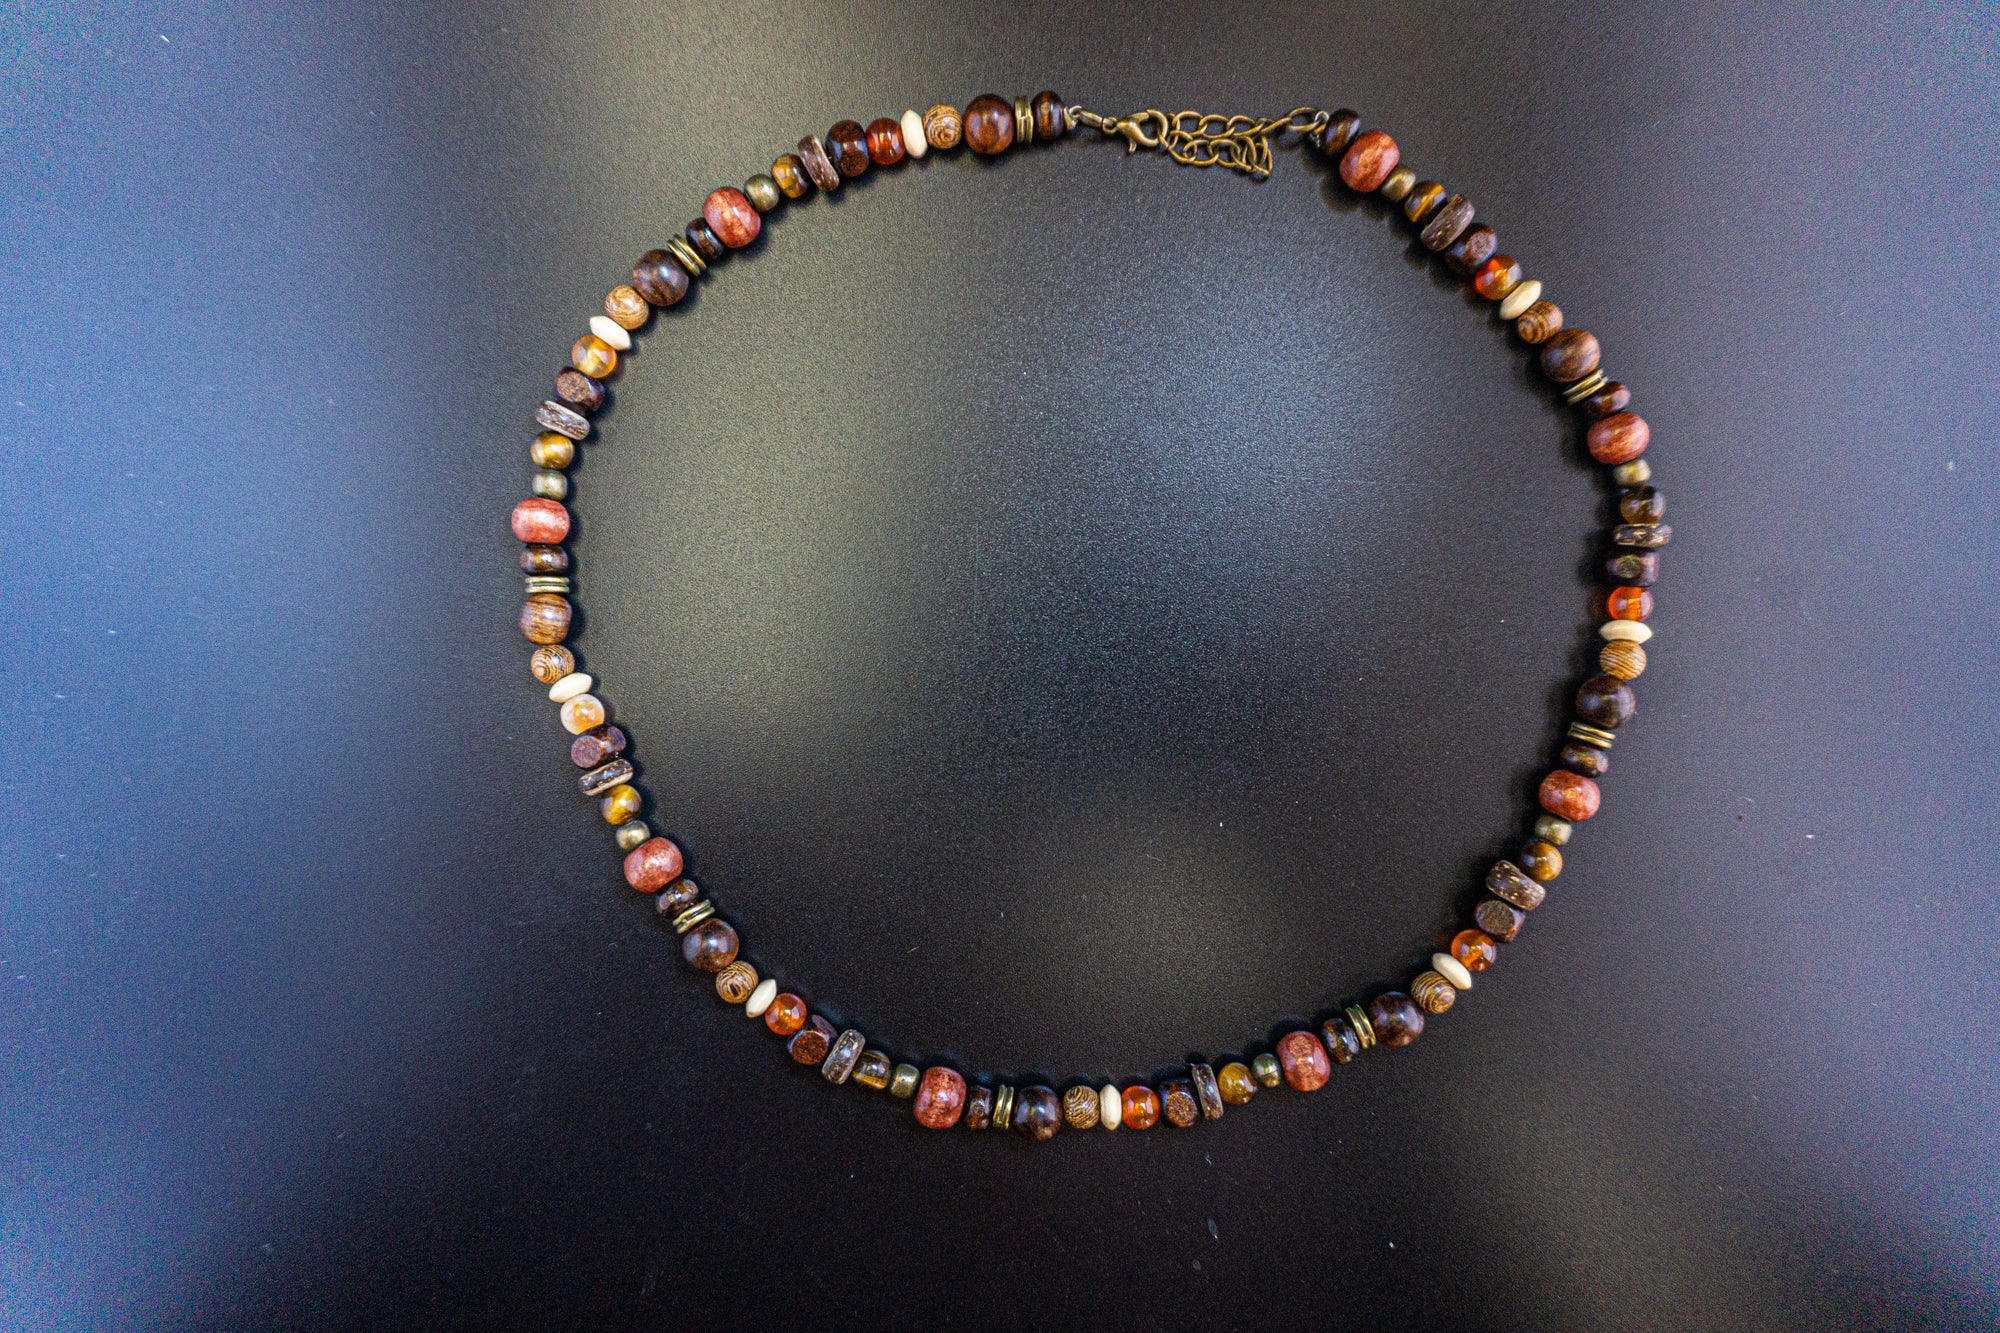 surfer choker necklace made of wood, coconut, agate and tiger eye gemstones- wander jewellery